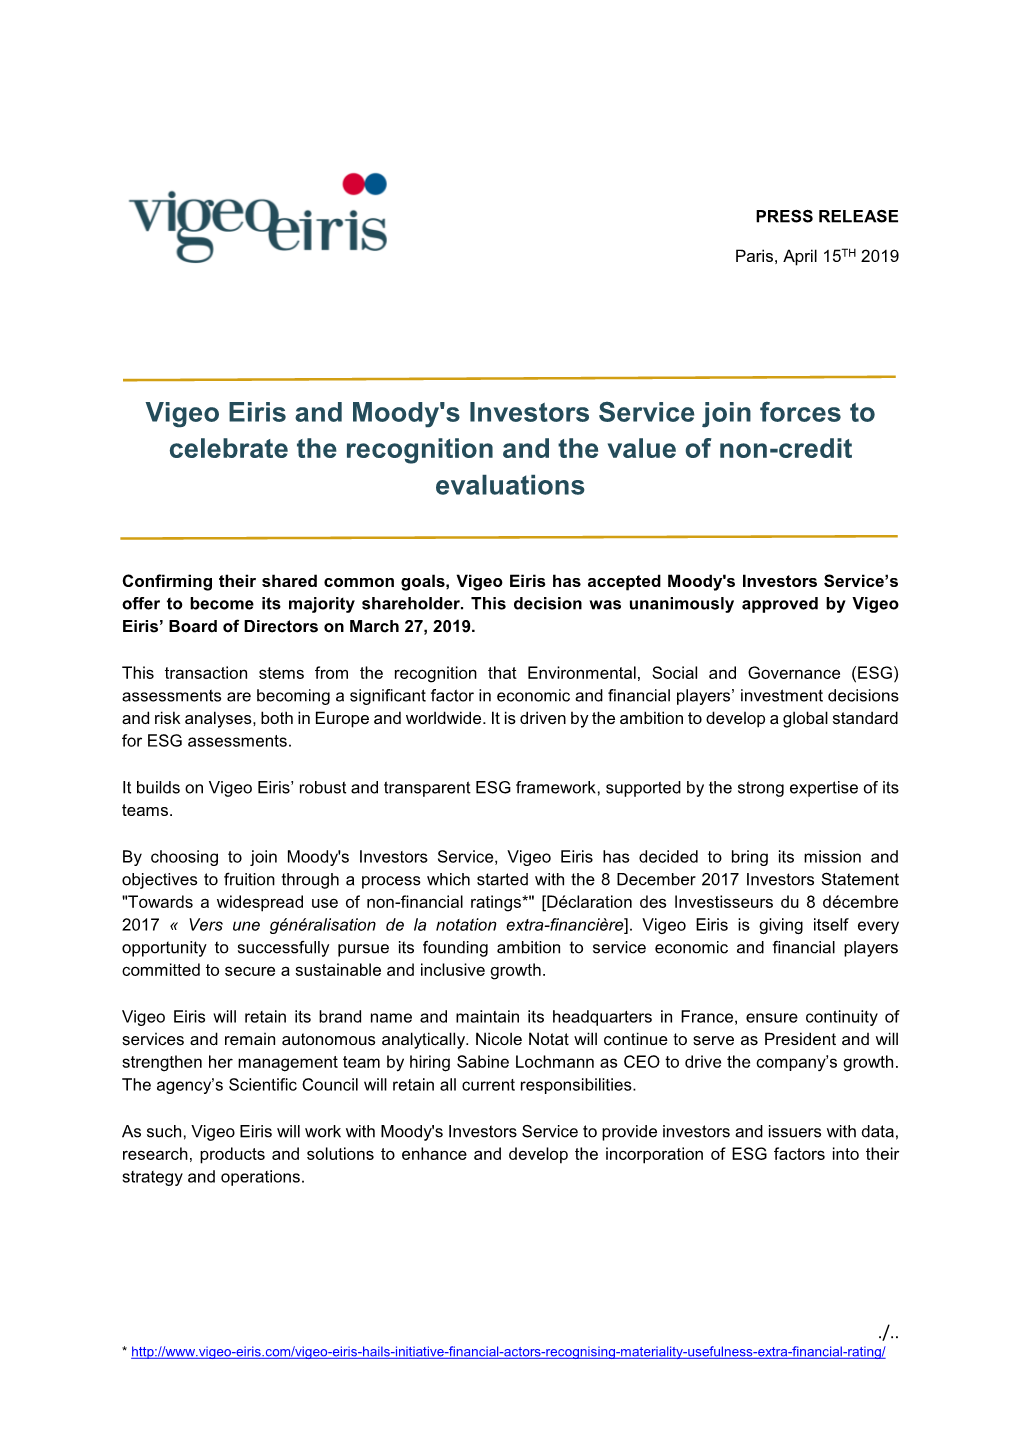 Vigeo Eiris and Moody's Investors Service Join Forces to Celebrate the Recognition and the Value of Non-Credit Evaluations